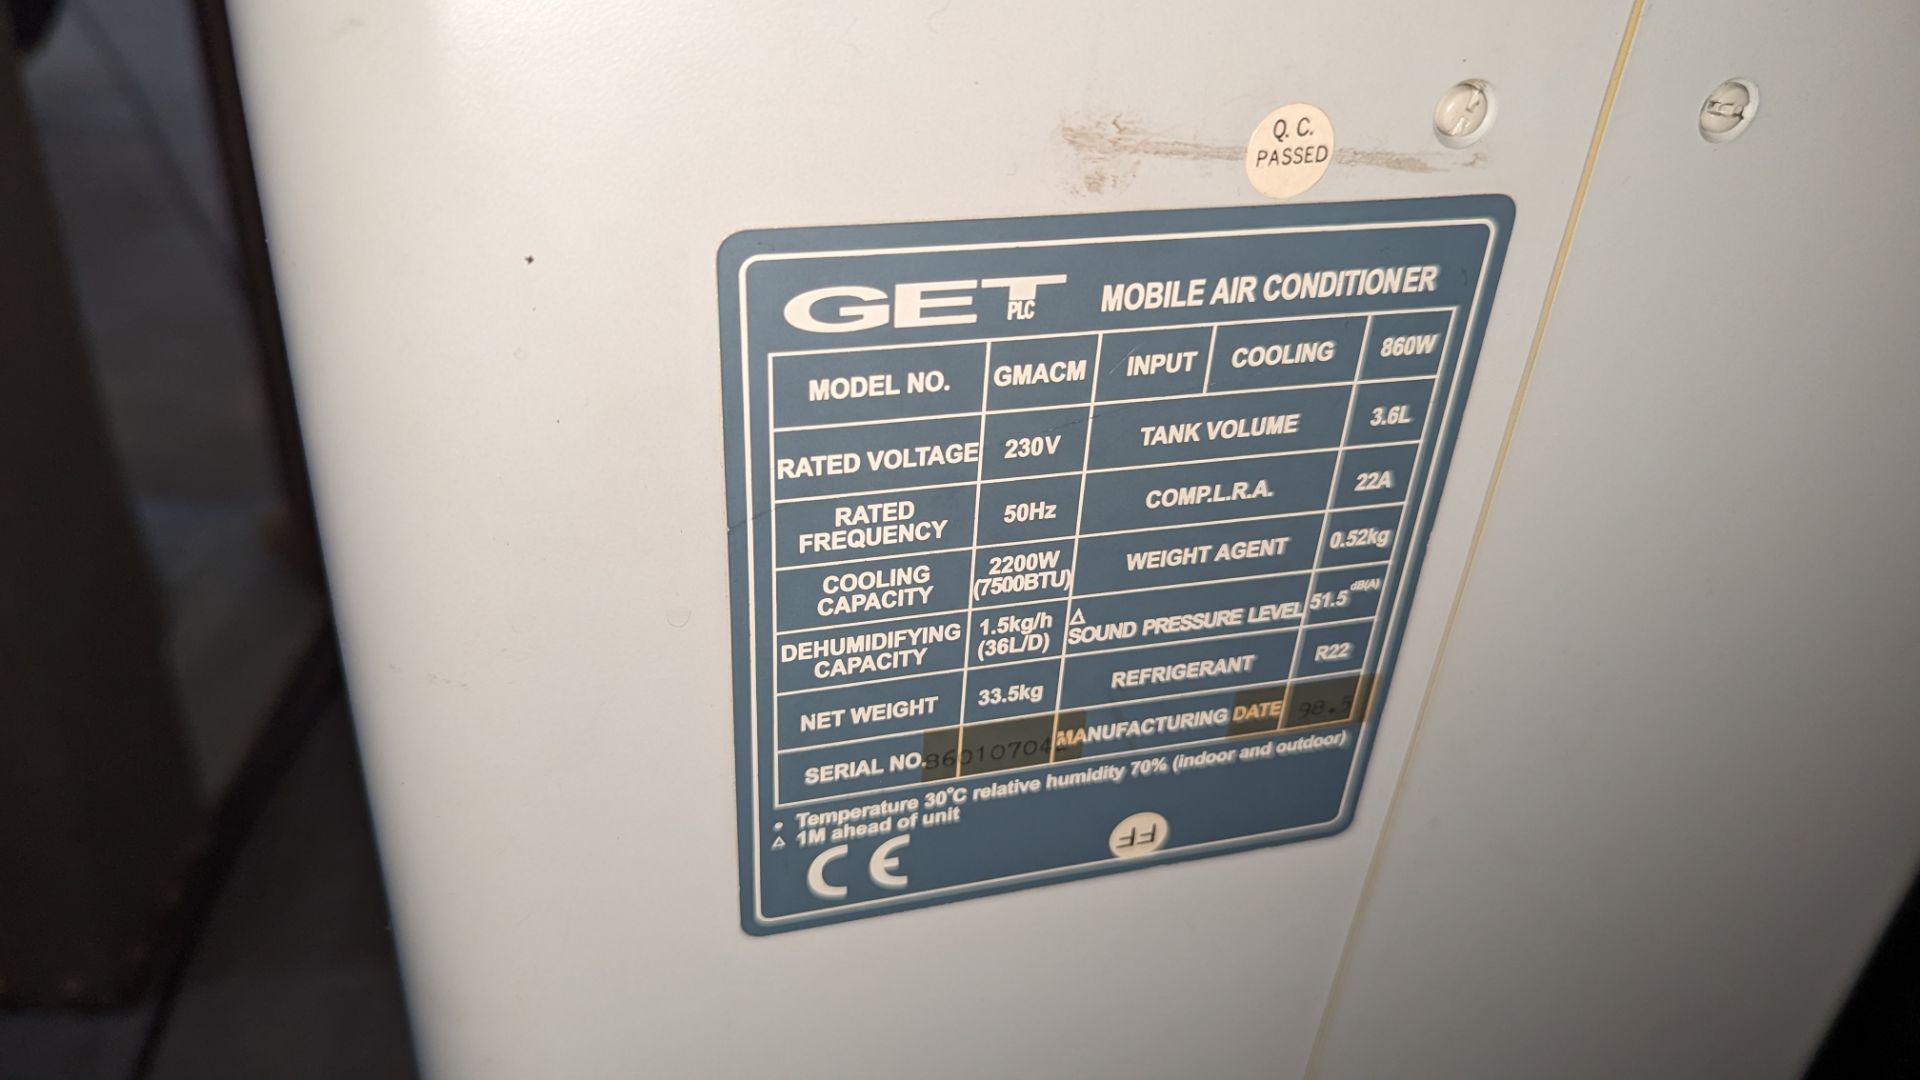 Get mobile air conditioning unit - Image 7 of 7